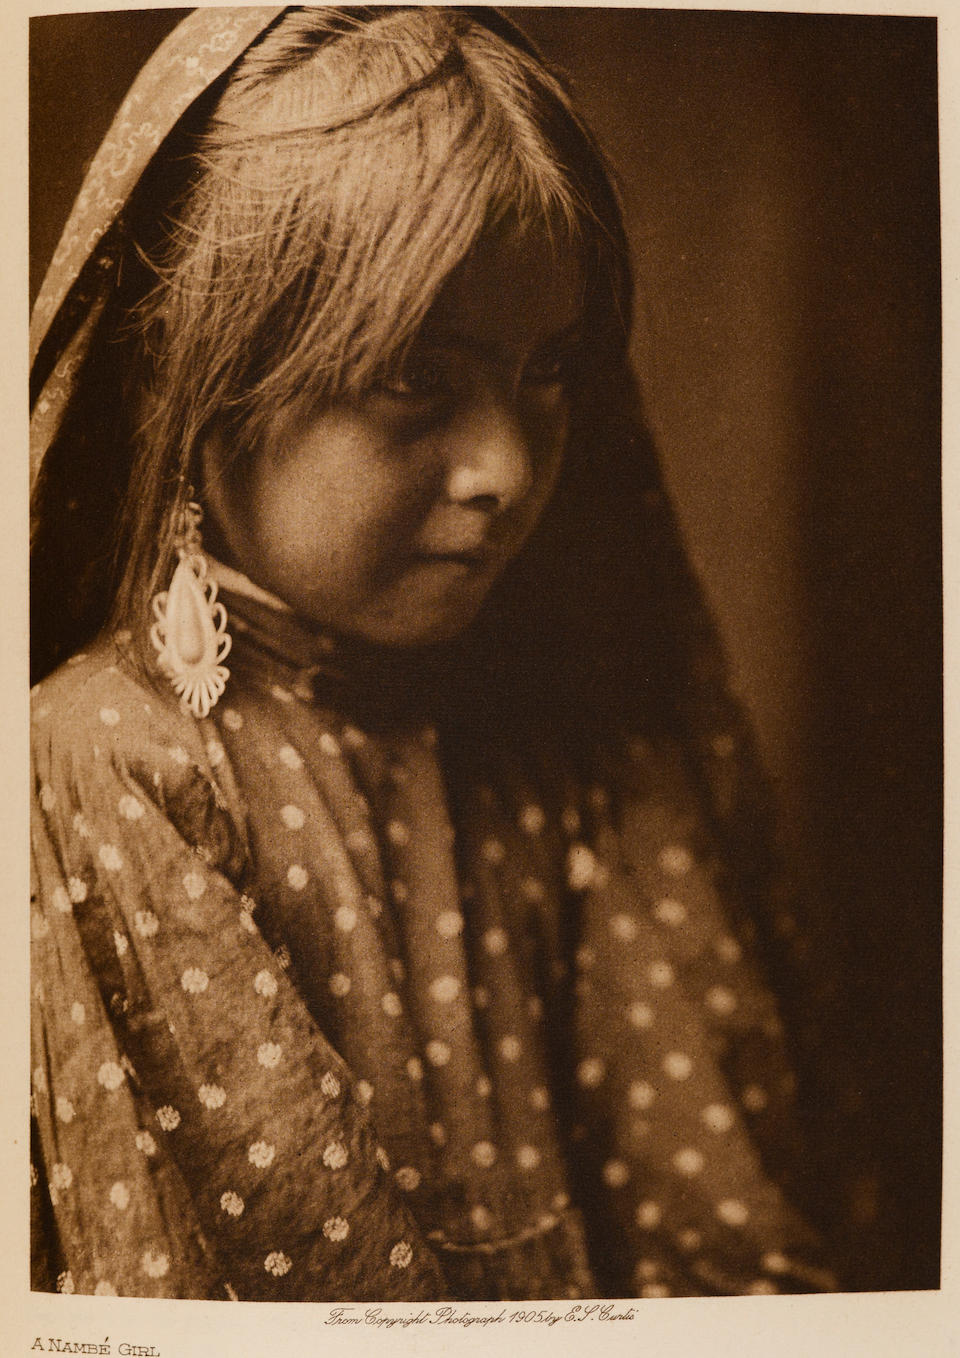 Edward S. Curtis (American, 1868-1952); The North American Indian, Volume 17;